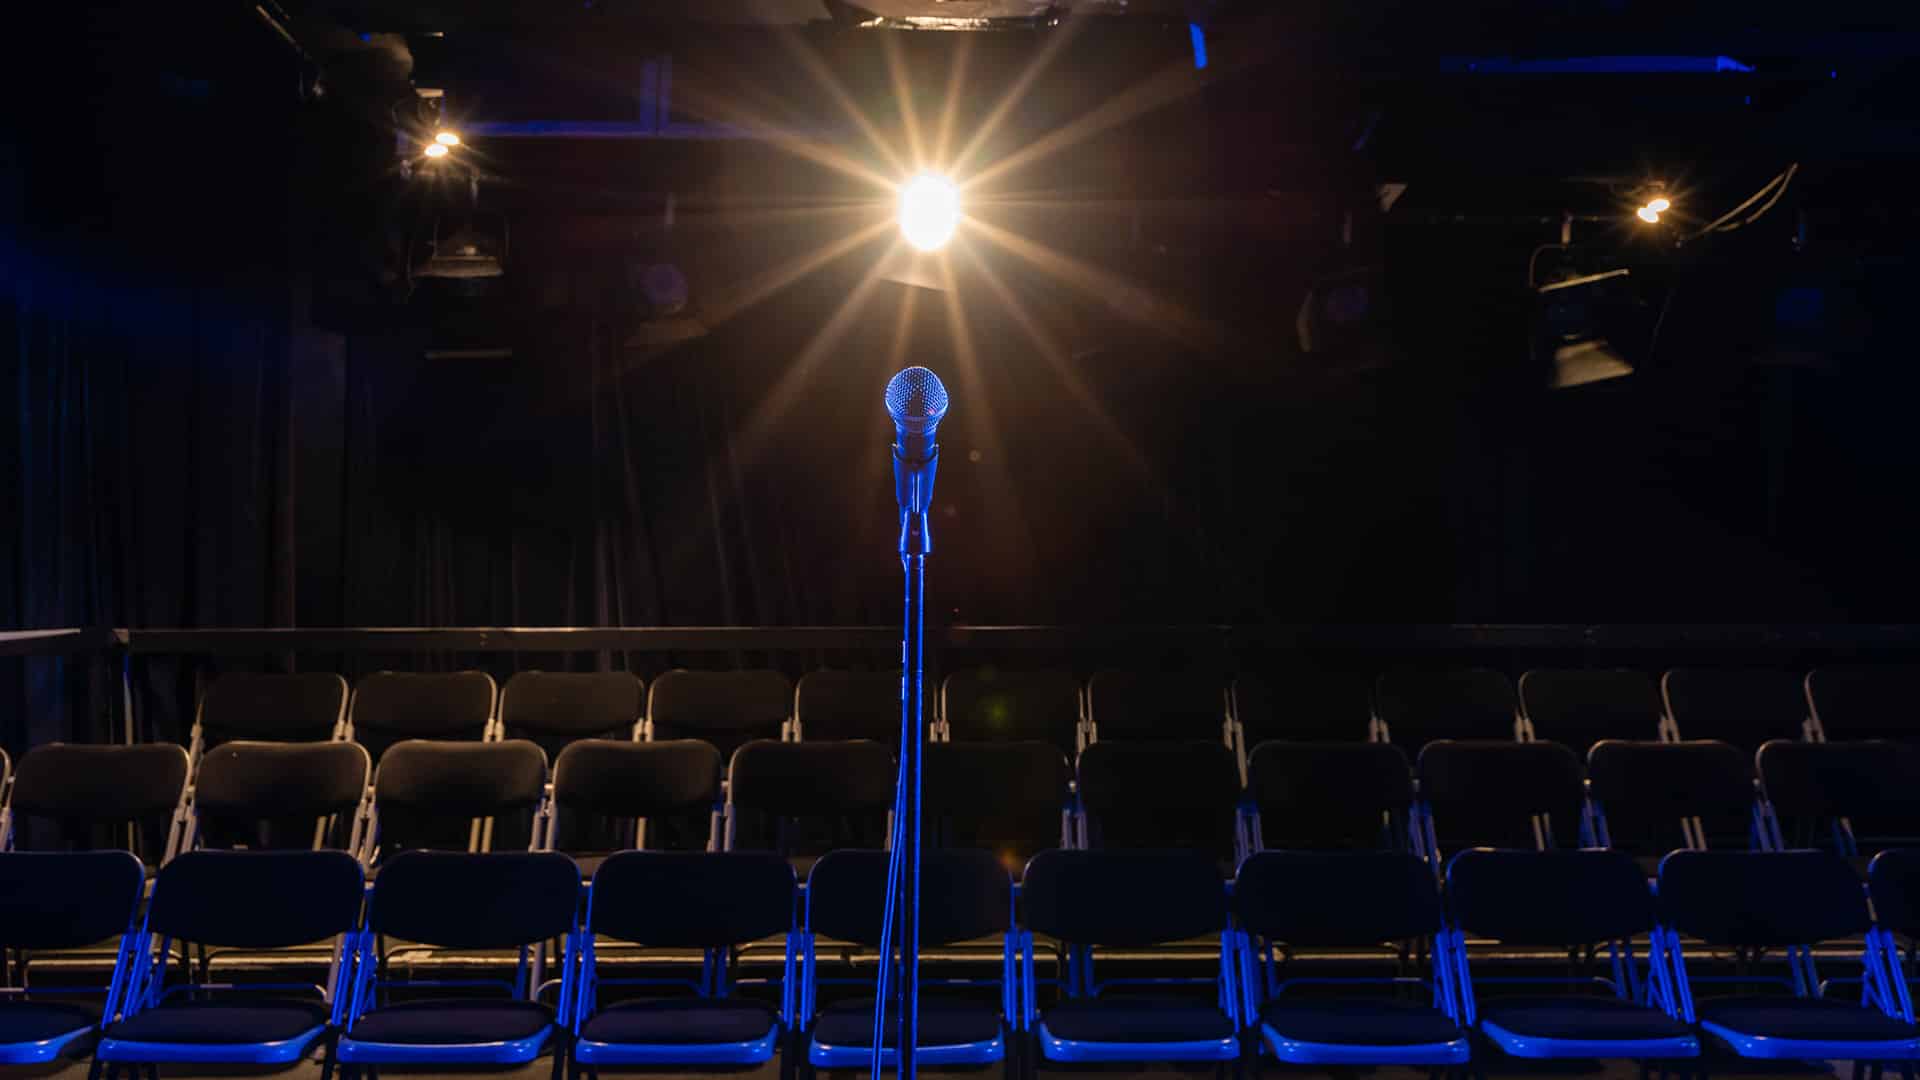 Microphone on stage with bright light and seats in front